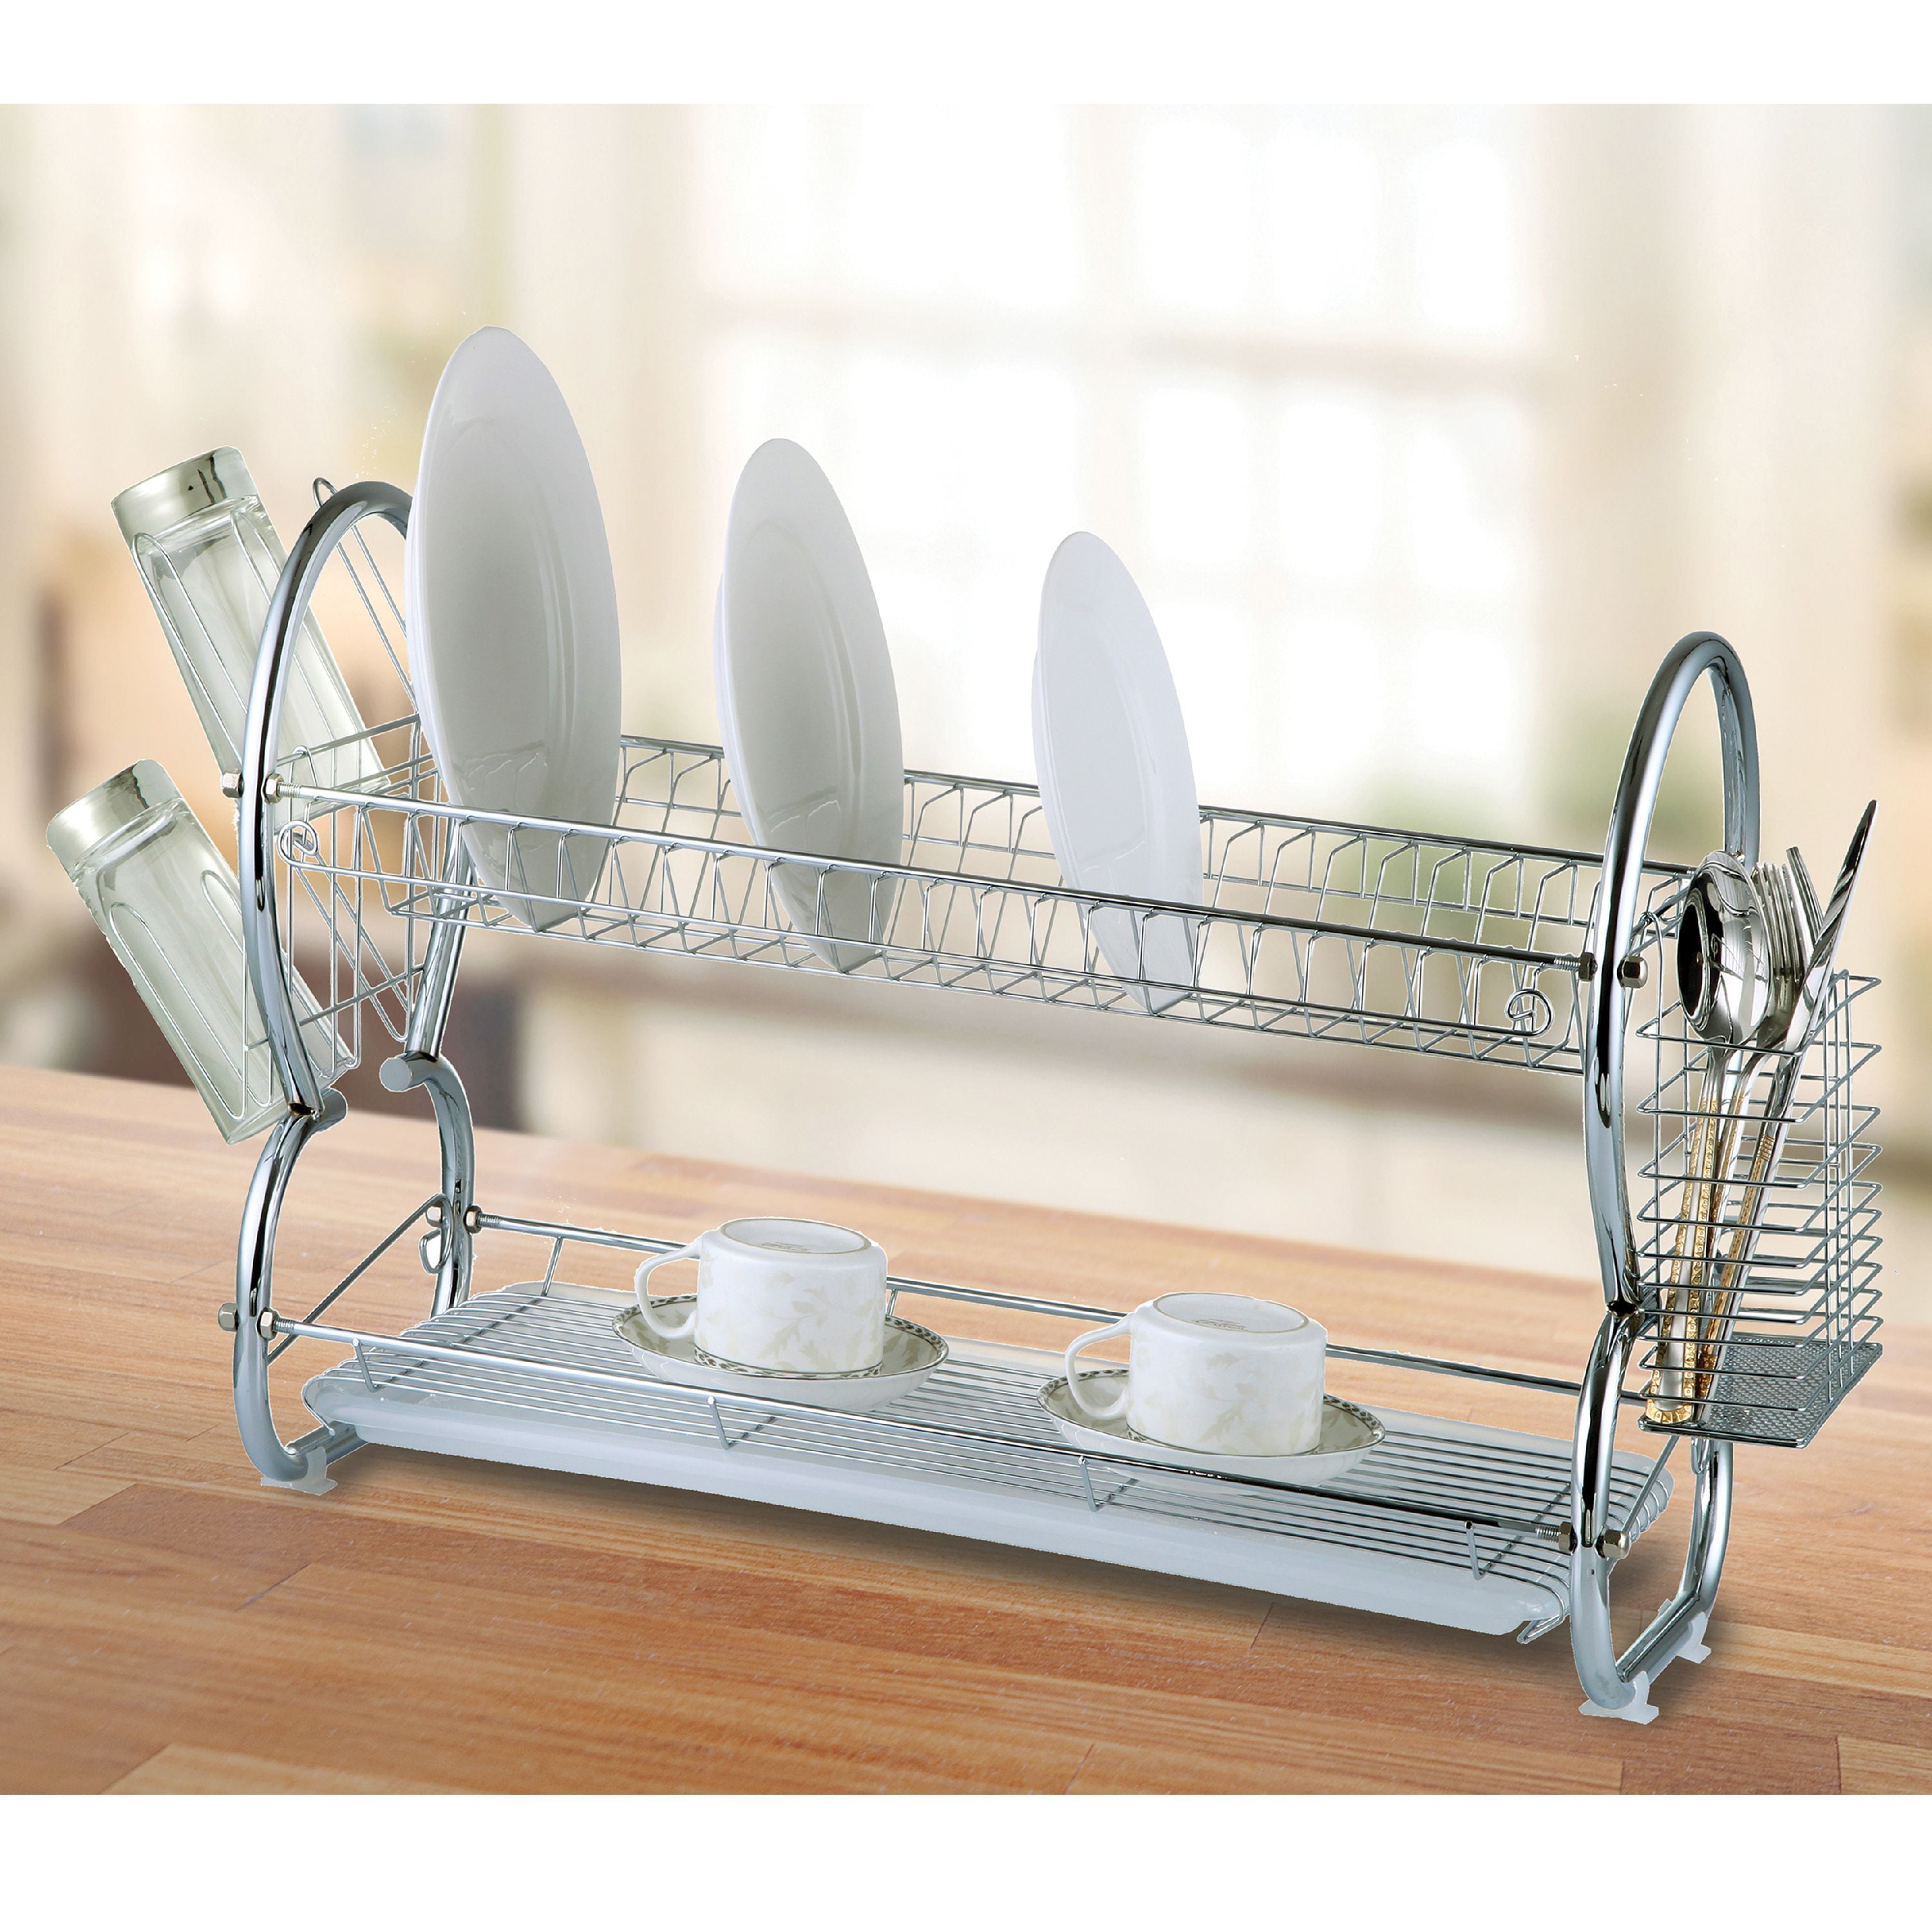 Smart Design Dish Drainer Rack - Large Chrome - 17.5 x 5.5 Inch 8117298 -  The Home Depot